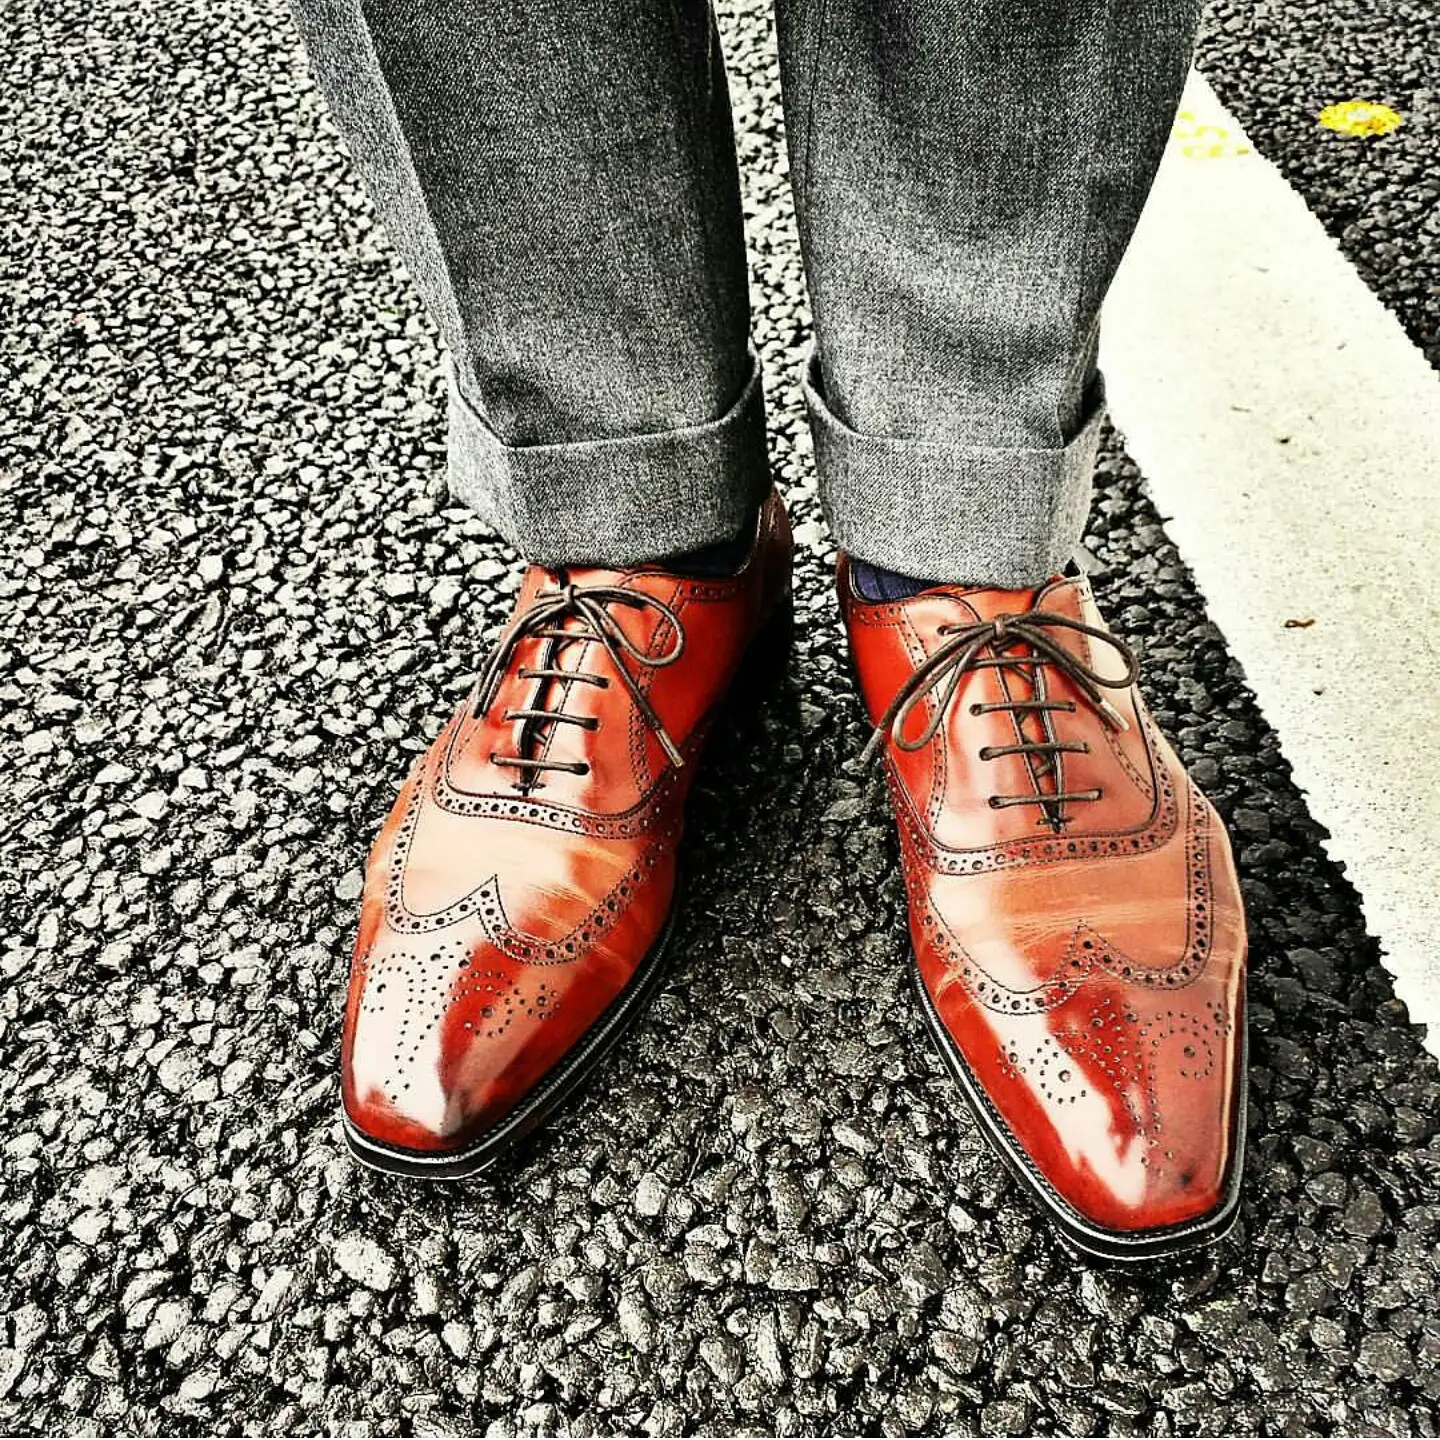 Edward Green Shoes worn very smartly